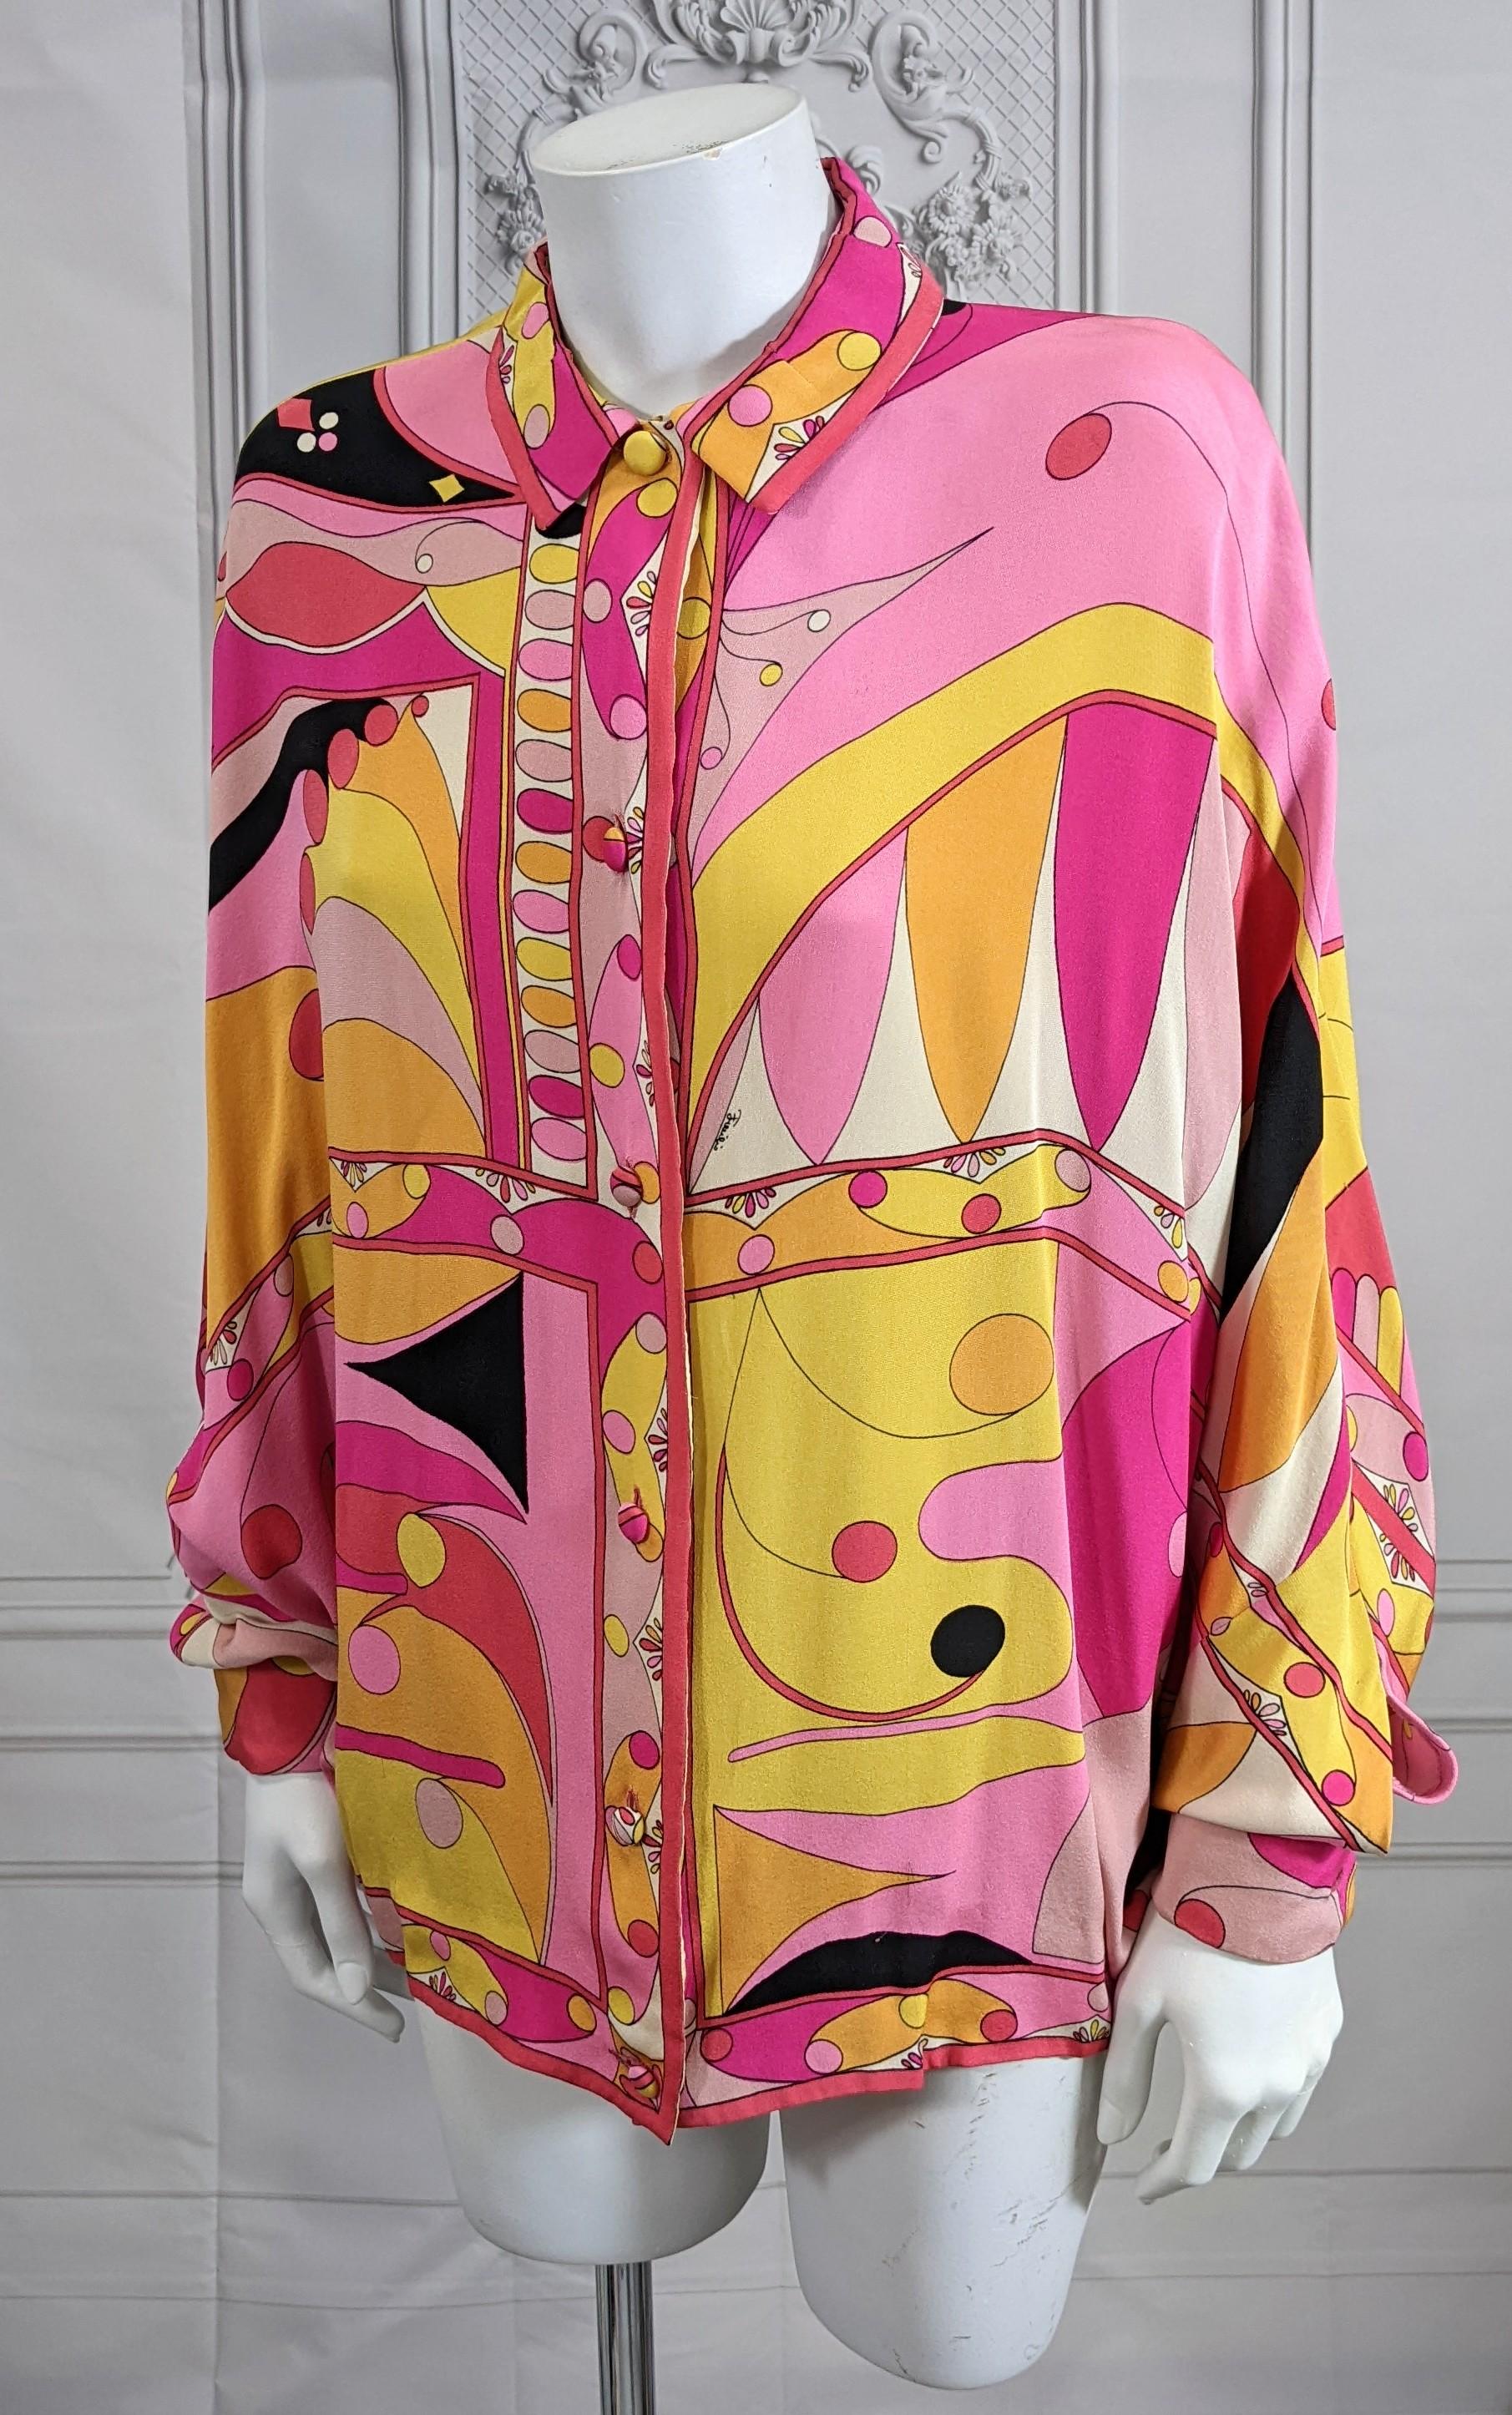 Unusual Emilio Pucci Print Bat Wing Blouse in heavy 3 ply silk crepe. All the amazing patterns are perfectly placed for effect. Blouse hits above hip and has no inset sleeves but is cut more like a kimono with gathered cuffs. There are buttonholes